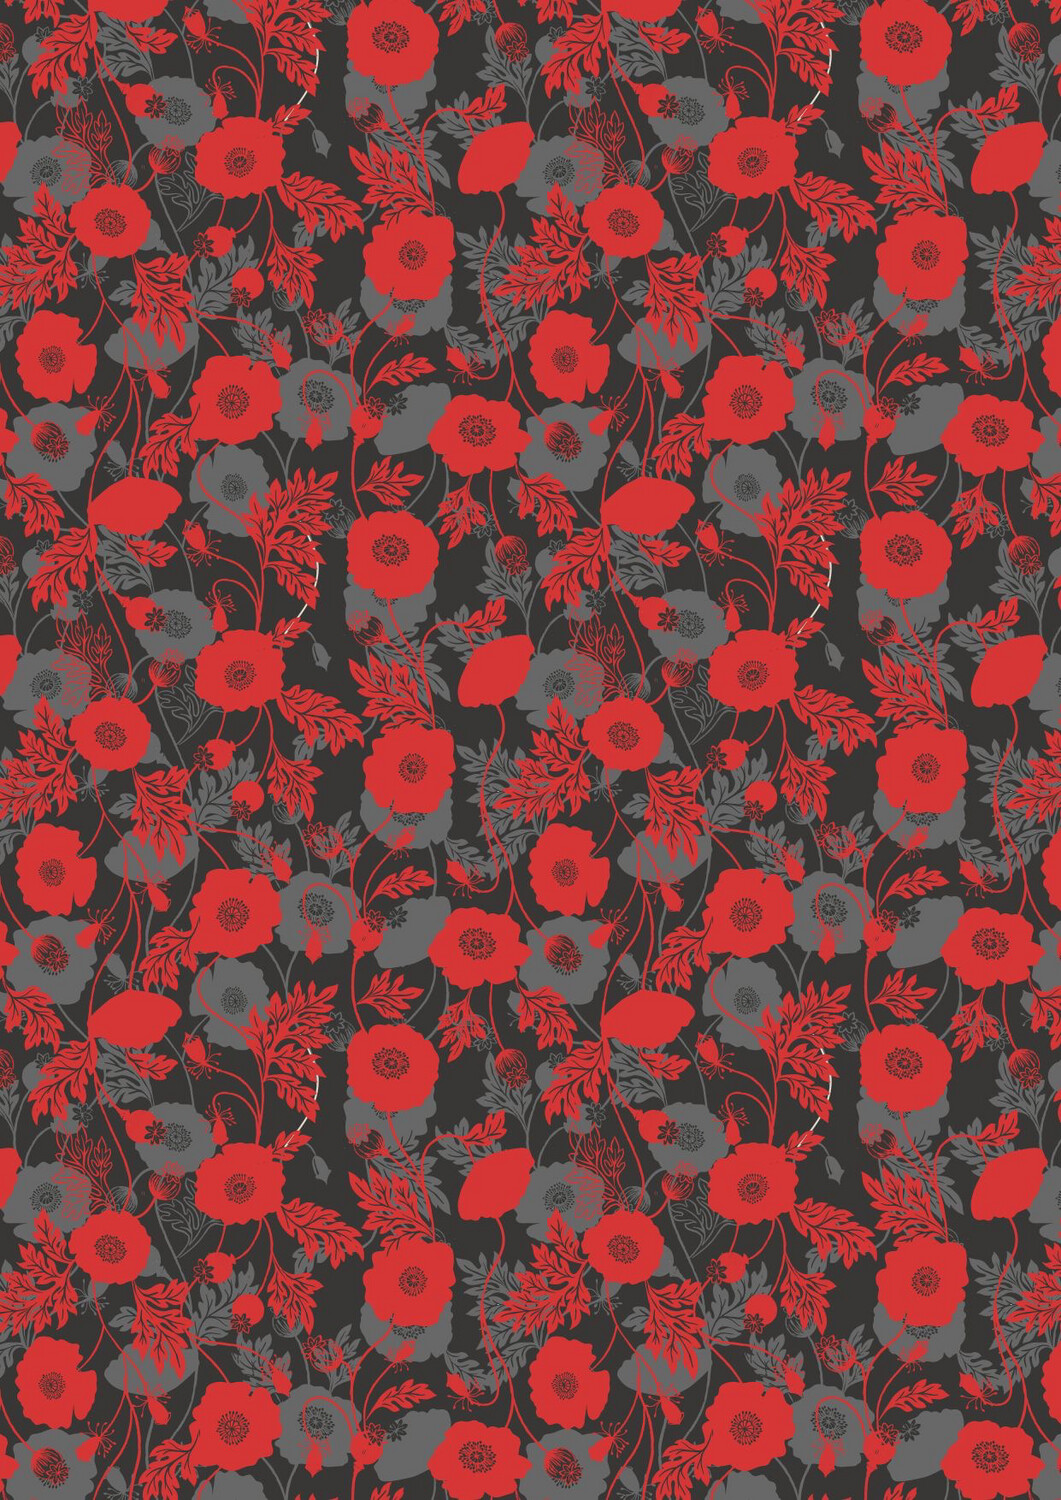 Lewis & Irene - Poppies - Poppy Shadow On Black A555.3 (Width of Fabric By 25cm) - R3